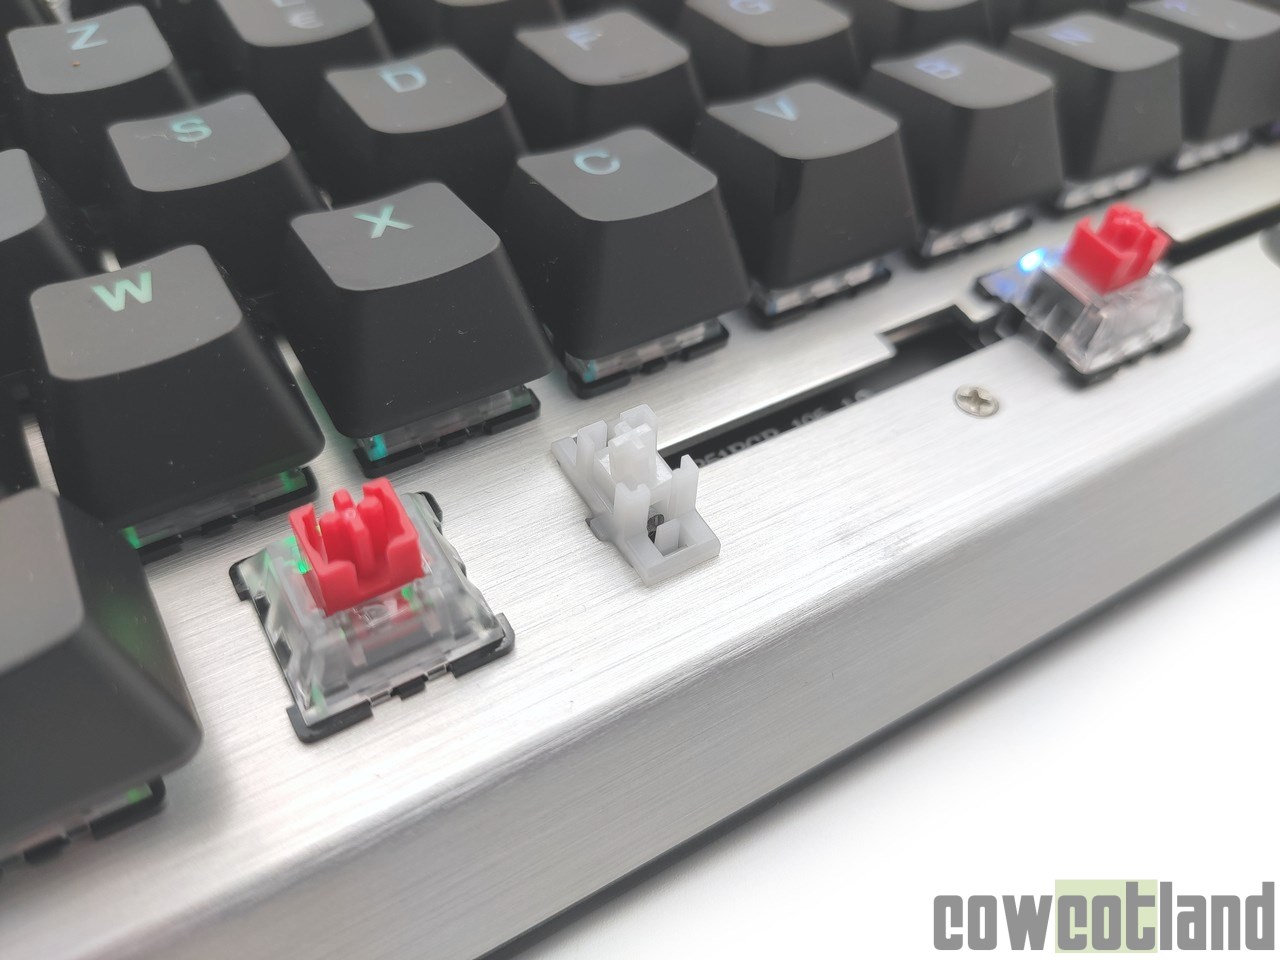 Image 46351, galerie Test clavier mcanique Cooler Master CK351 : switches optiques et hot-swappables !